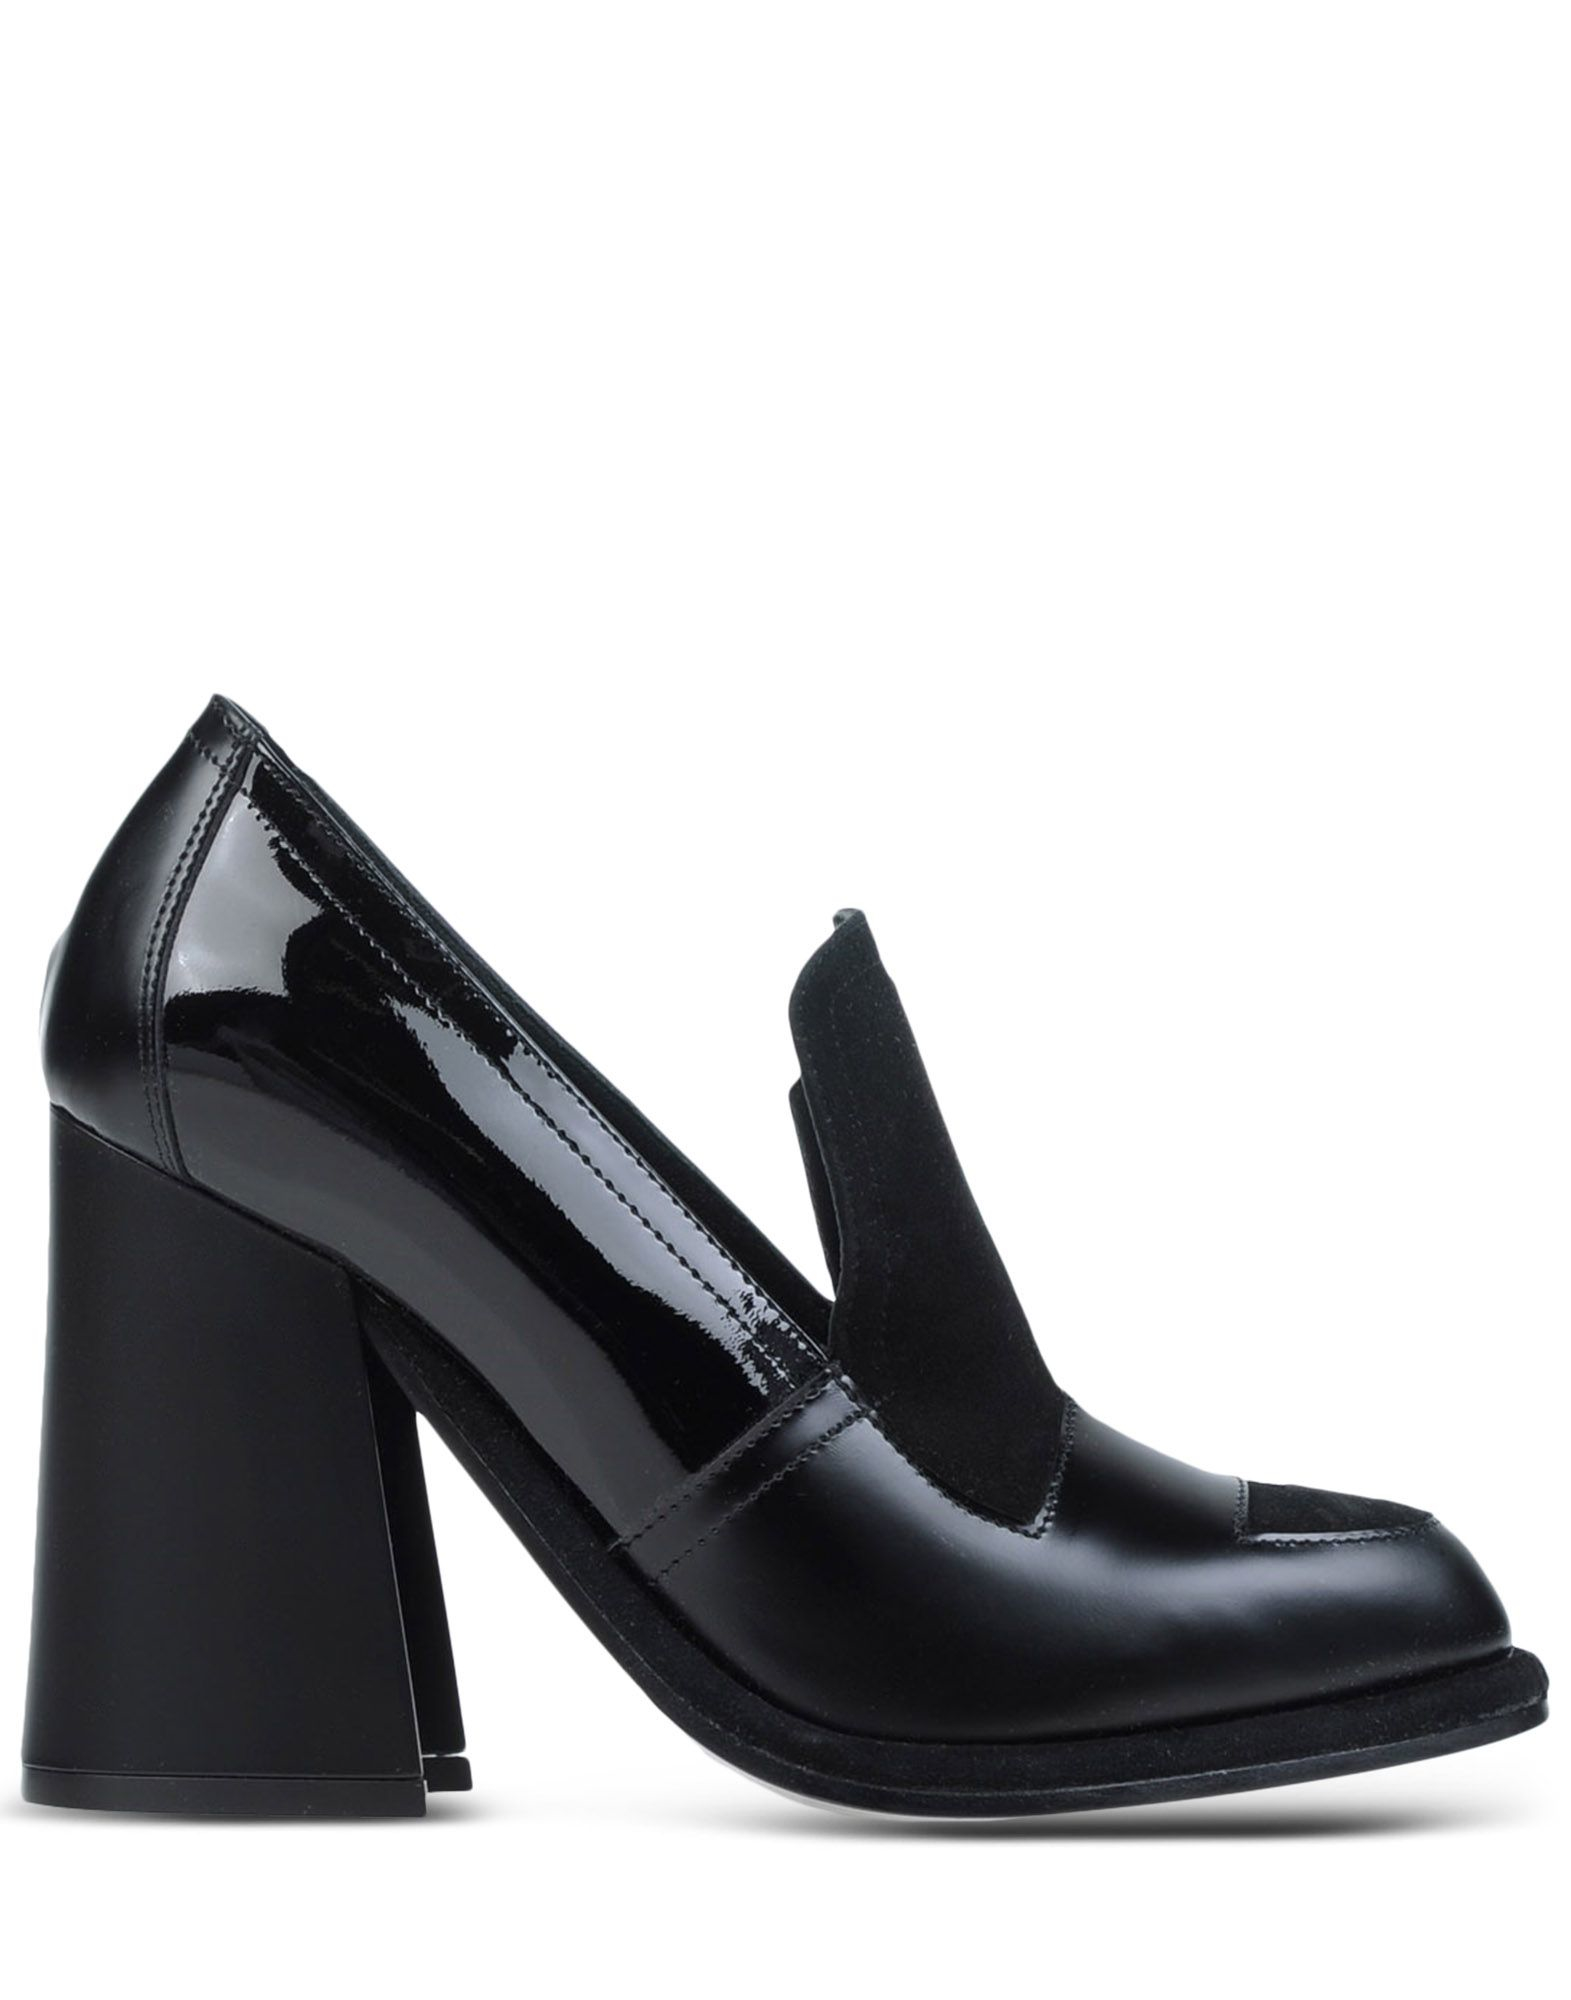 J.w. anderson Contrast Leather Loafers in Black | Lyst